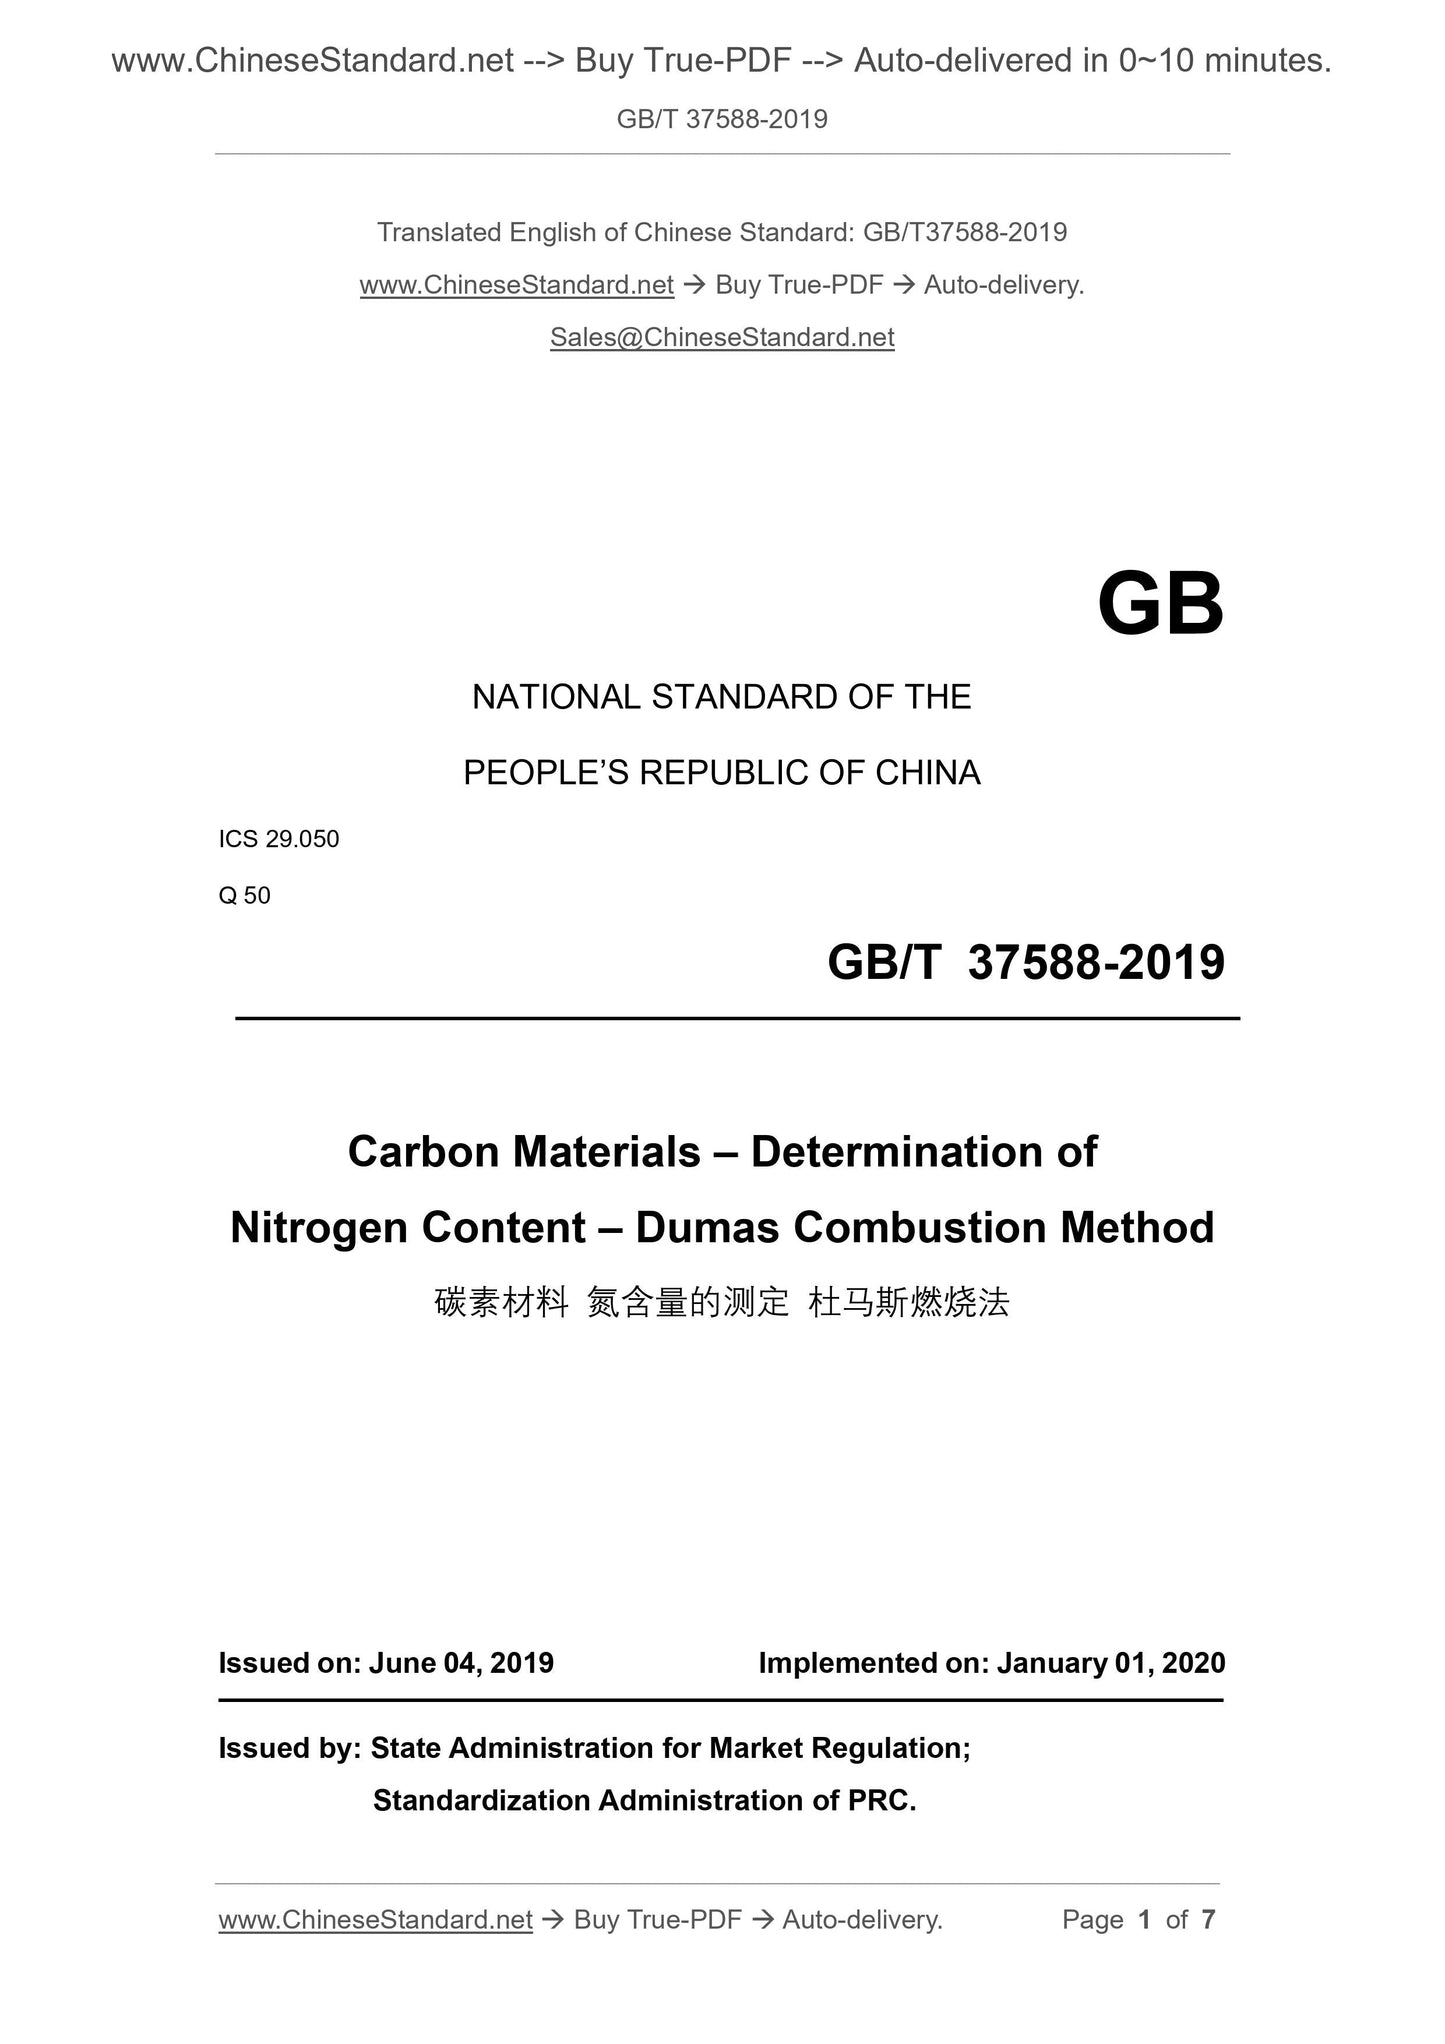 GB/T 37588-2019 Page 1